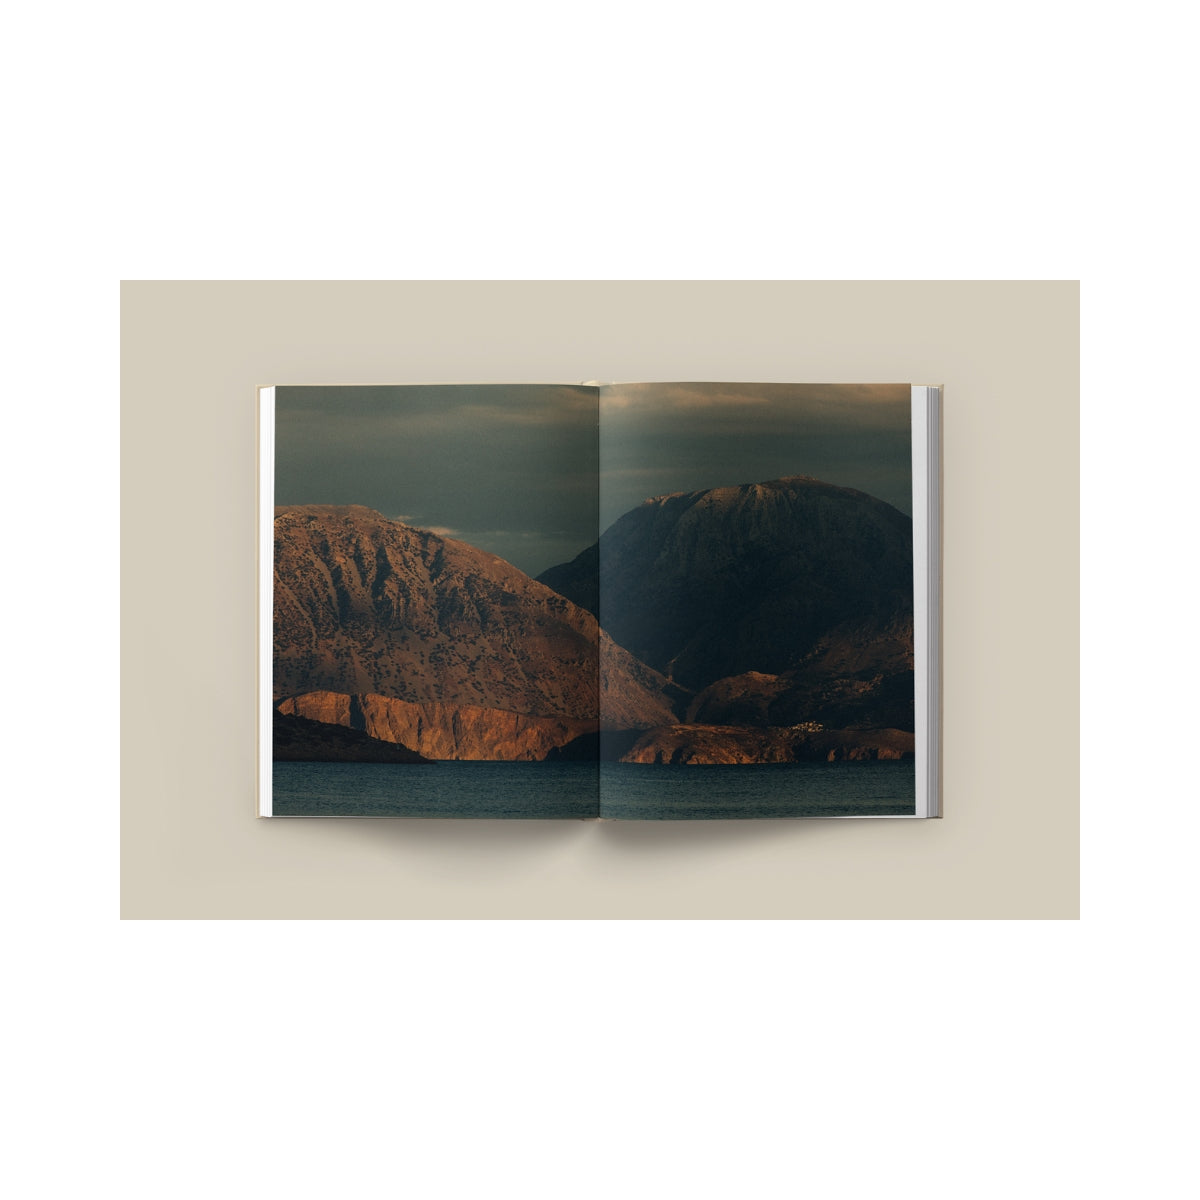 New Mags | The Design Hotels Book – Taste and Place